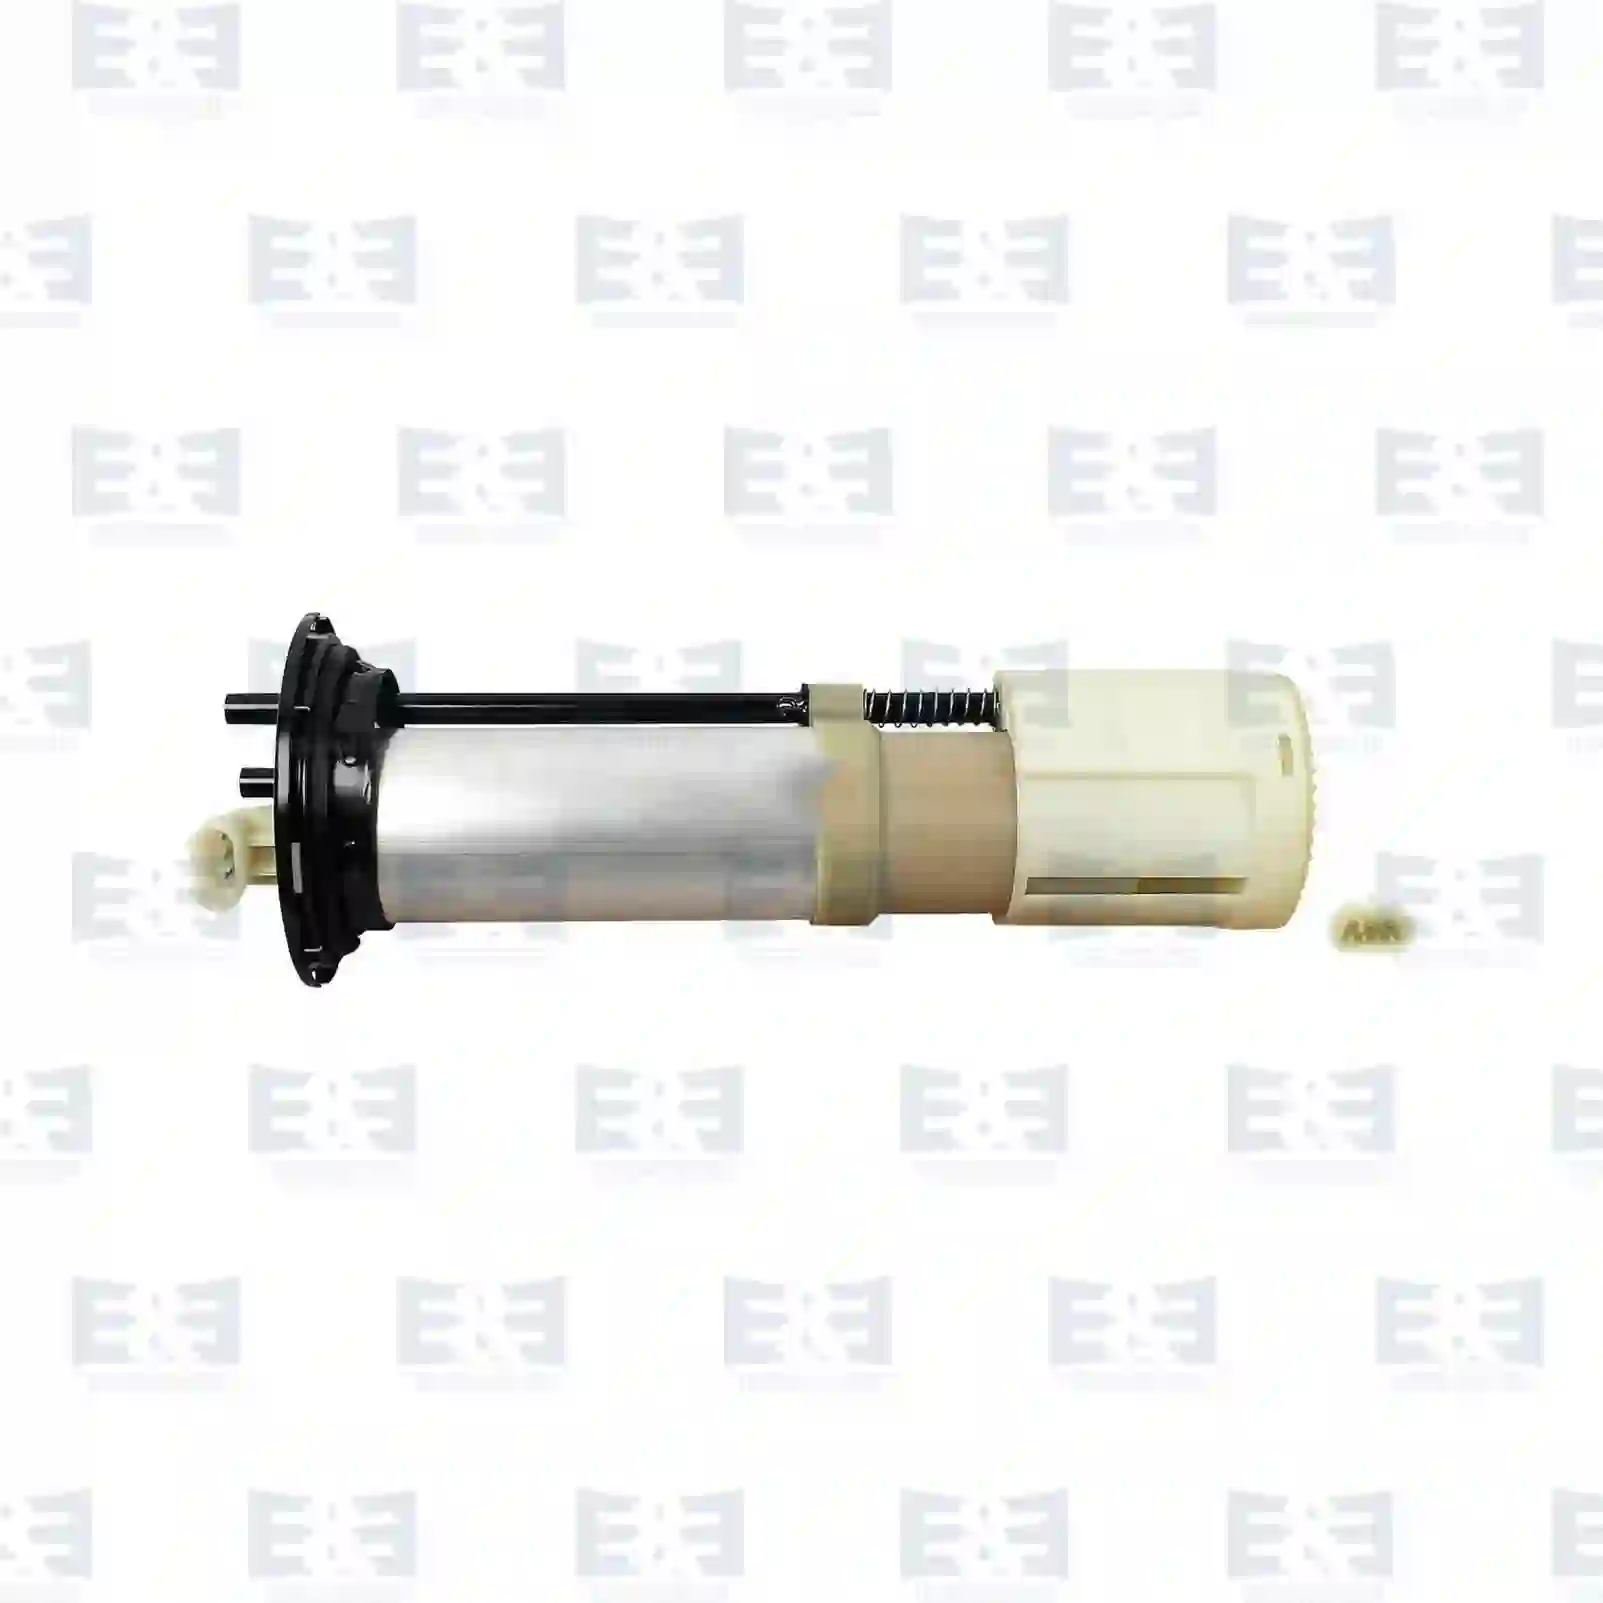  Fuel level sensor, with seal ring || E&E Truck Spare Parts | Truck Spare Parts, Auotomotive Spare Parts